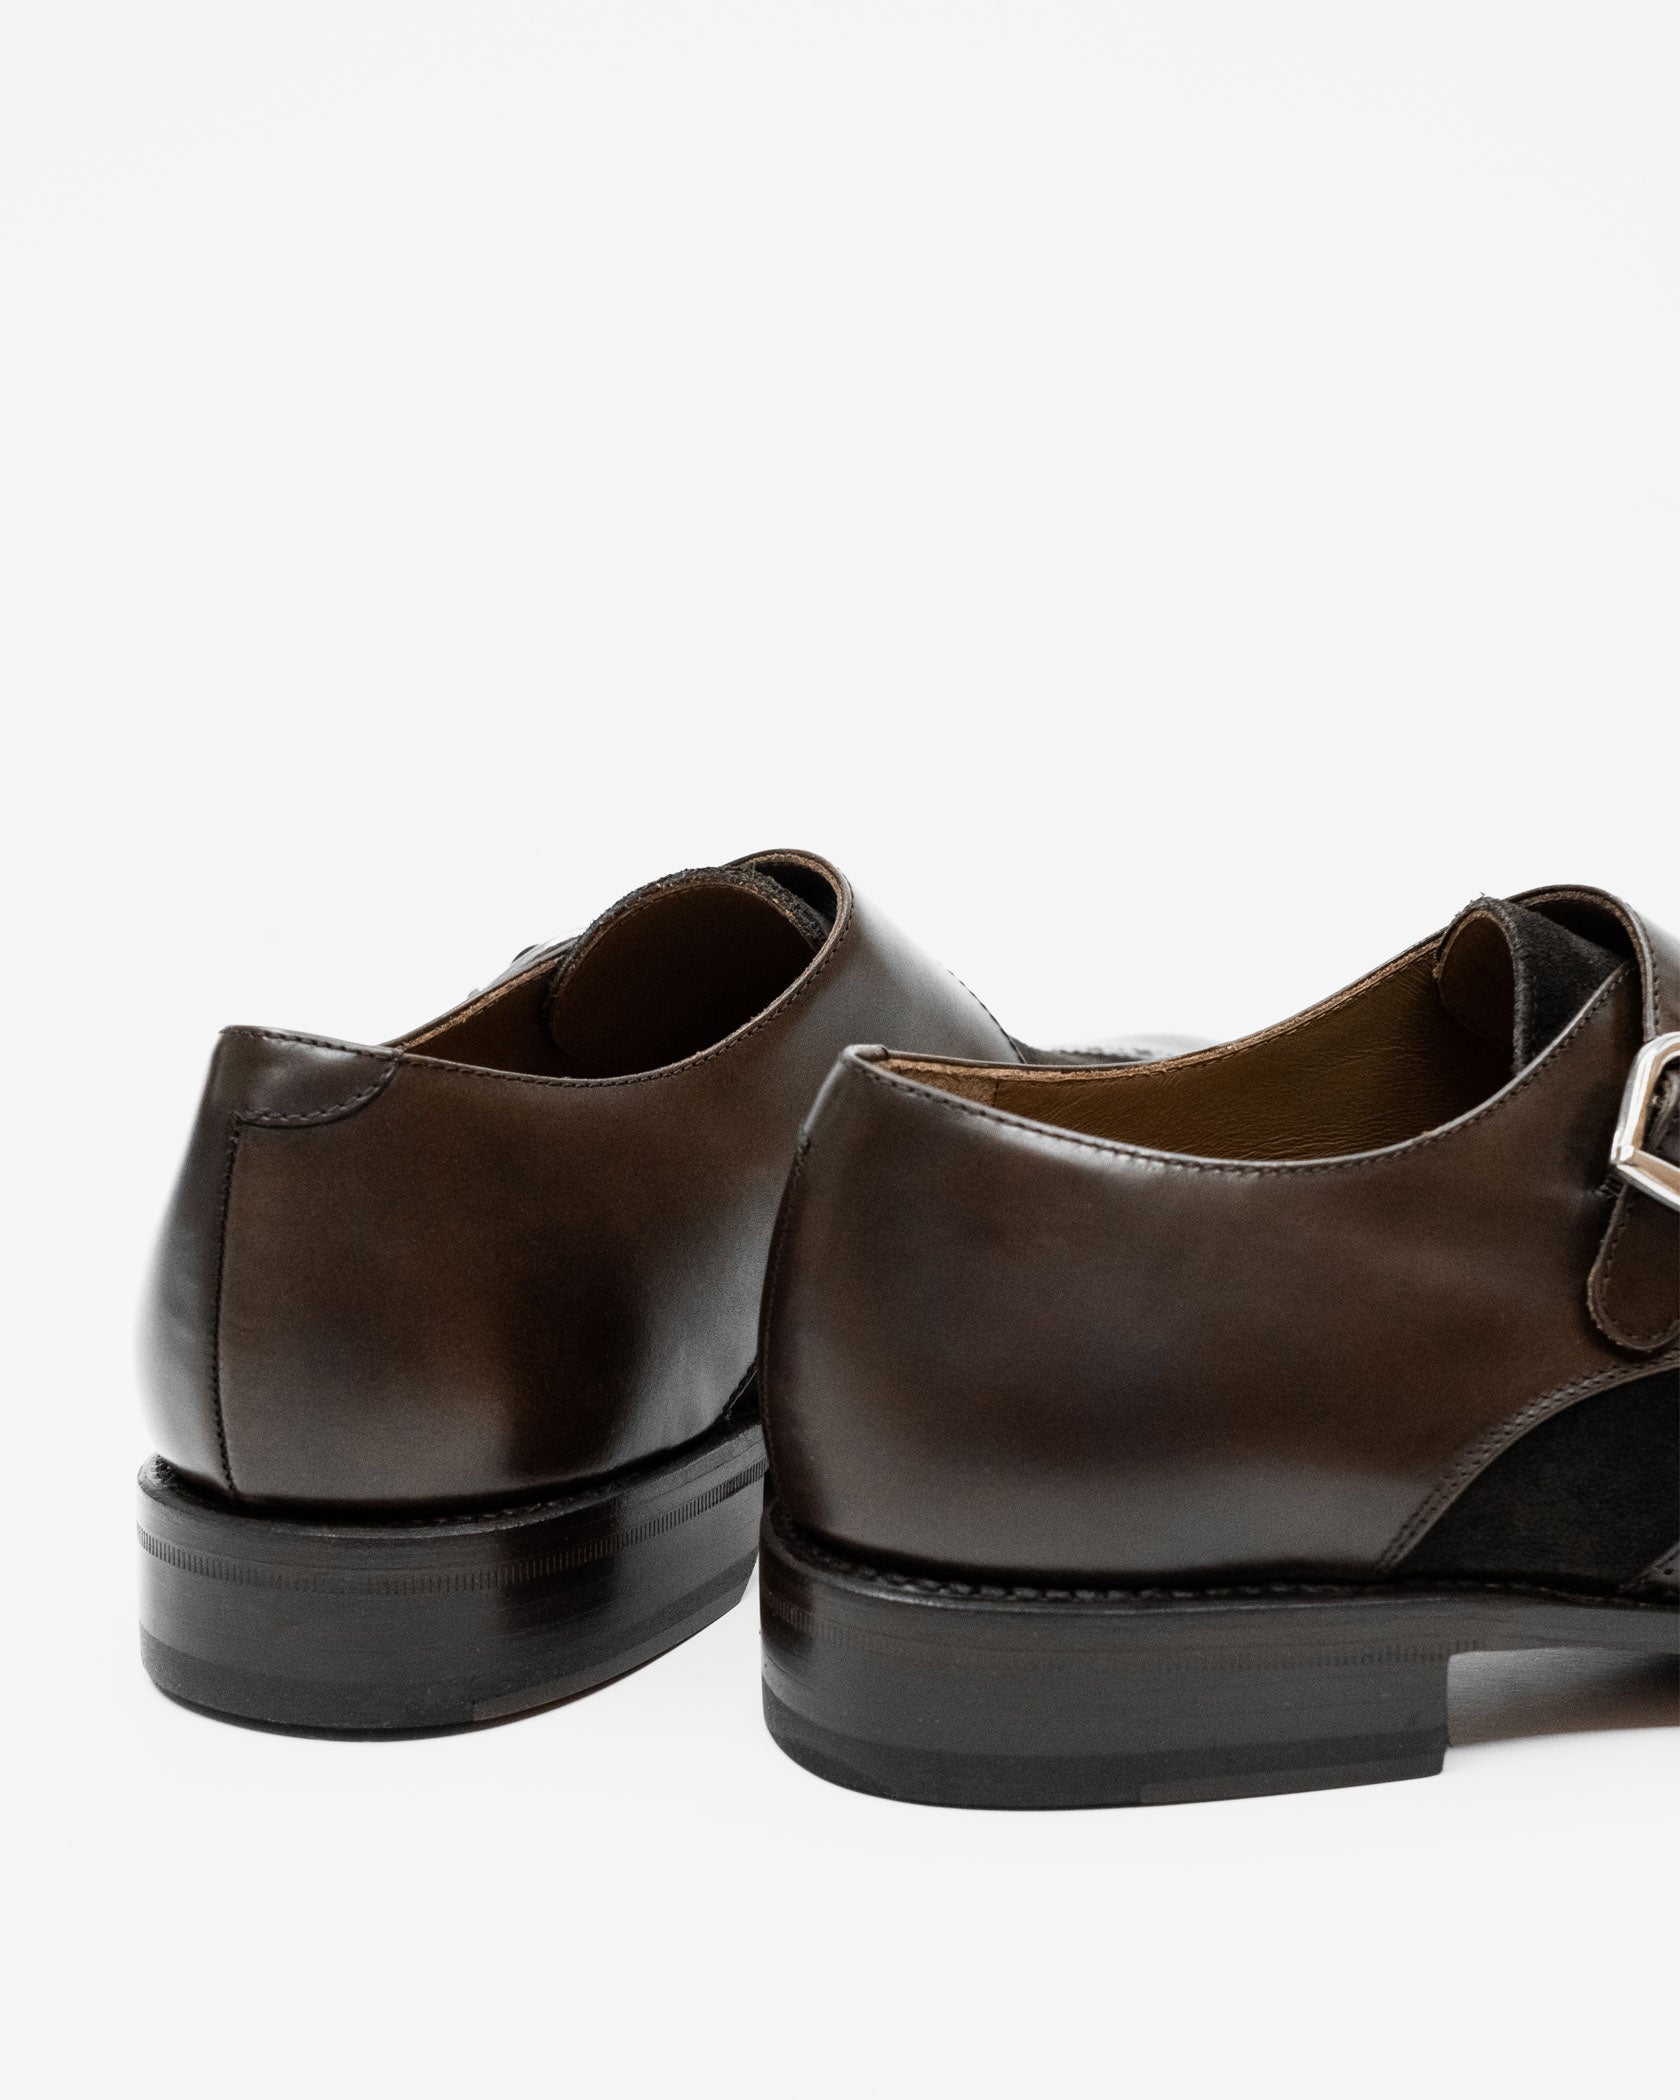 The Bellwether Brown Leather Wingtip Single Monk